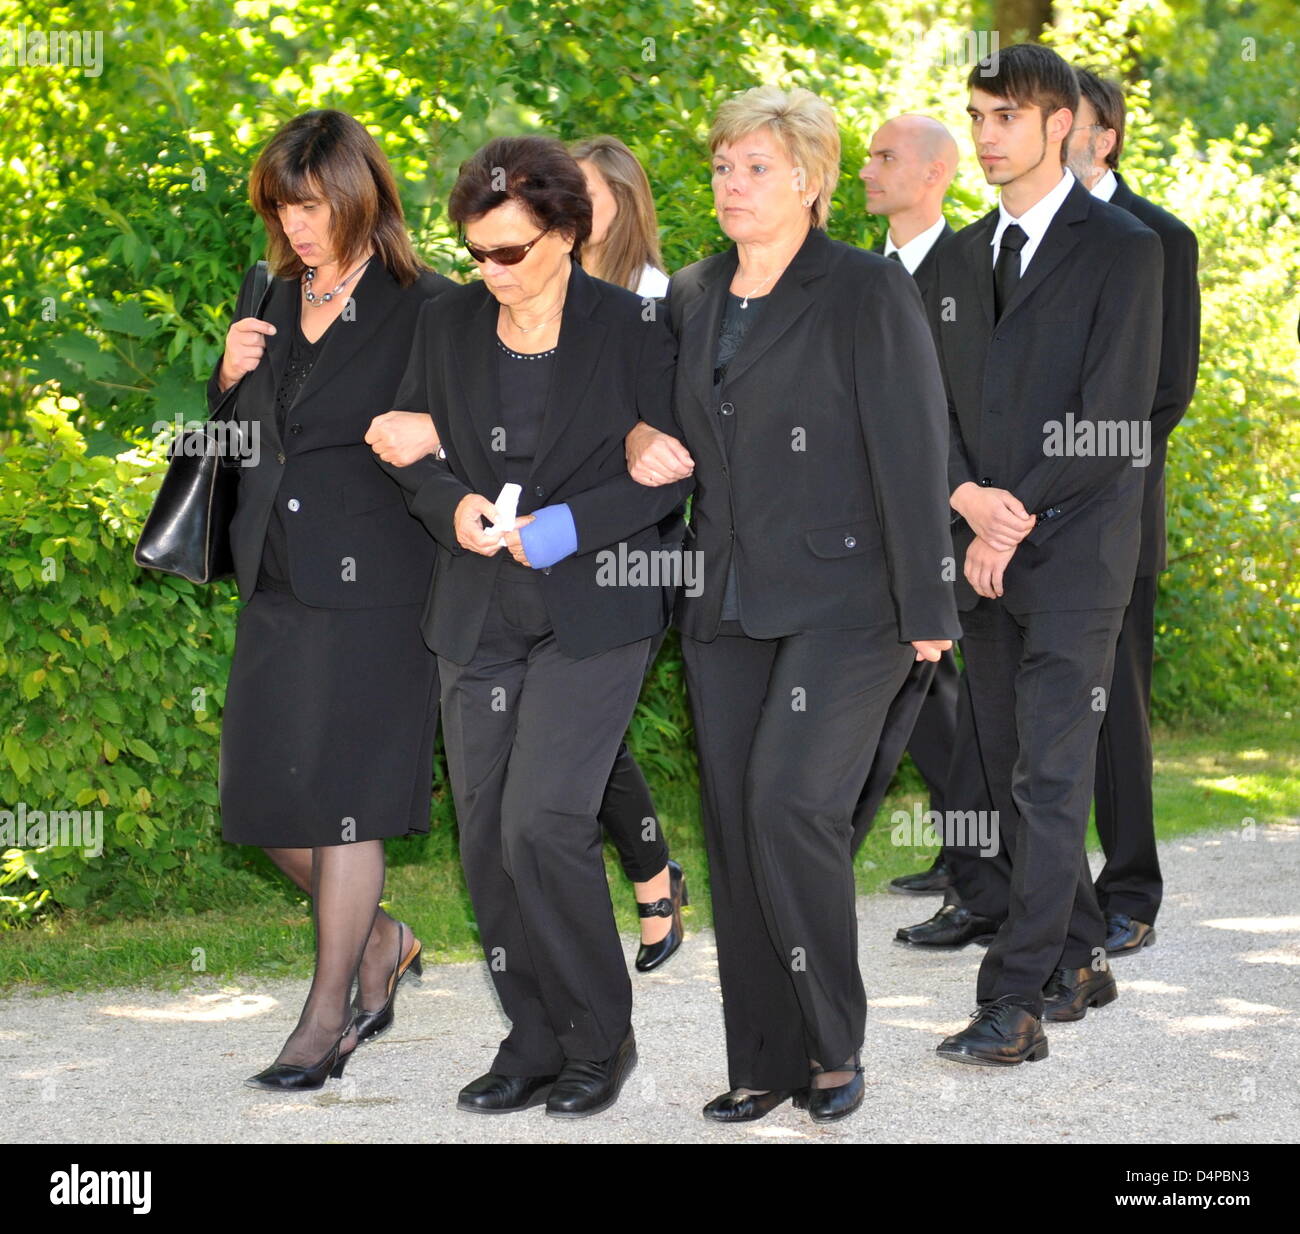 Doris (L) and Beate (R), sisters of Barbara Rudnik, and their mother Margot (C) pictured during the funeral of actress Barbara Rudnik in Munich, Germany, 29 May 2009. Rudnik passed away aged 50 on 23 May 2009 after a long struggle against cancer. Photo: Ursula Dueren Stock Photo